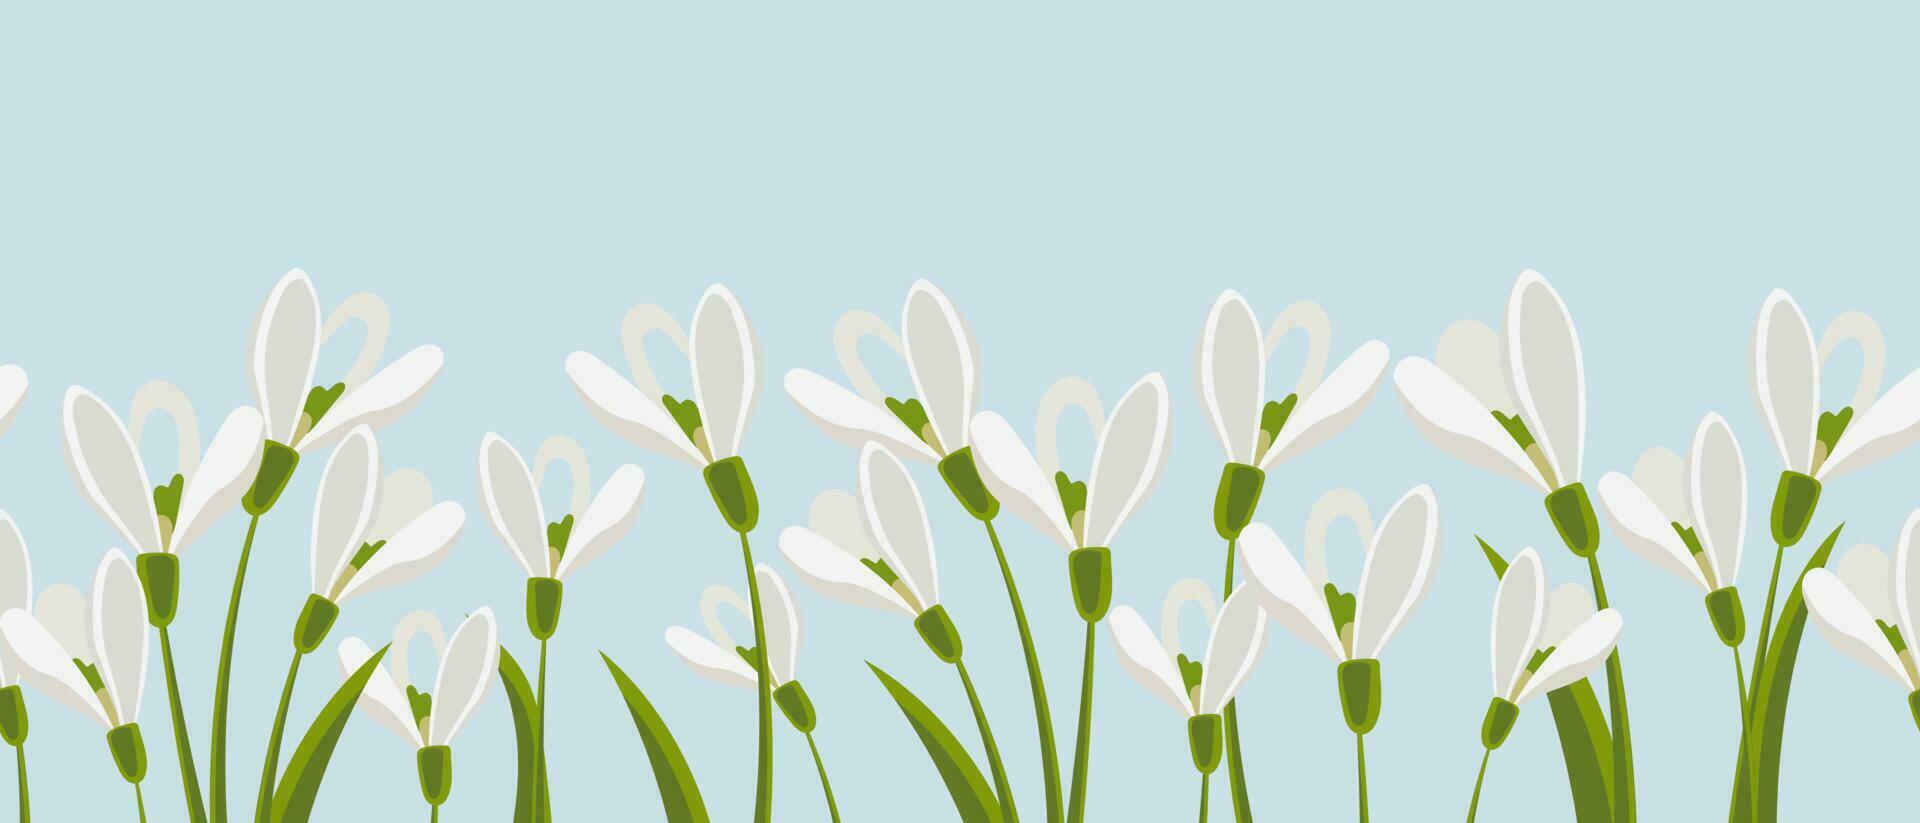 Border, spring flowers snowdrops. Spring background with copy space. Illustration, vector